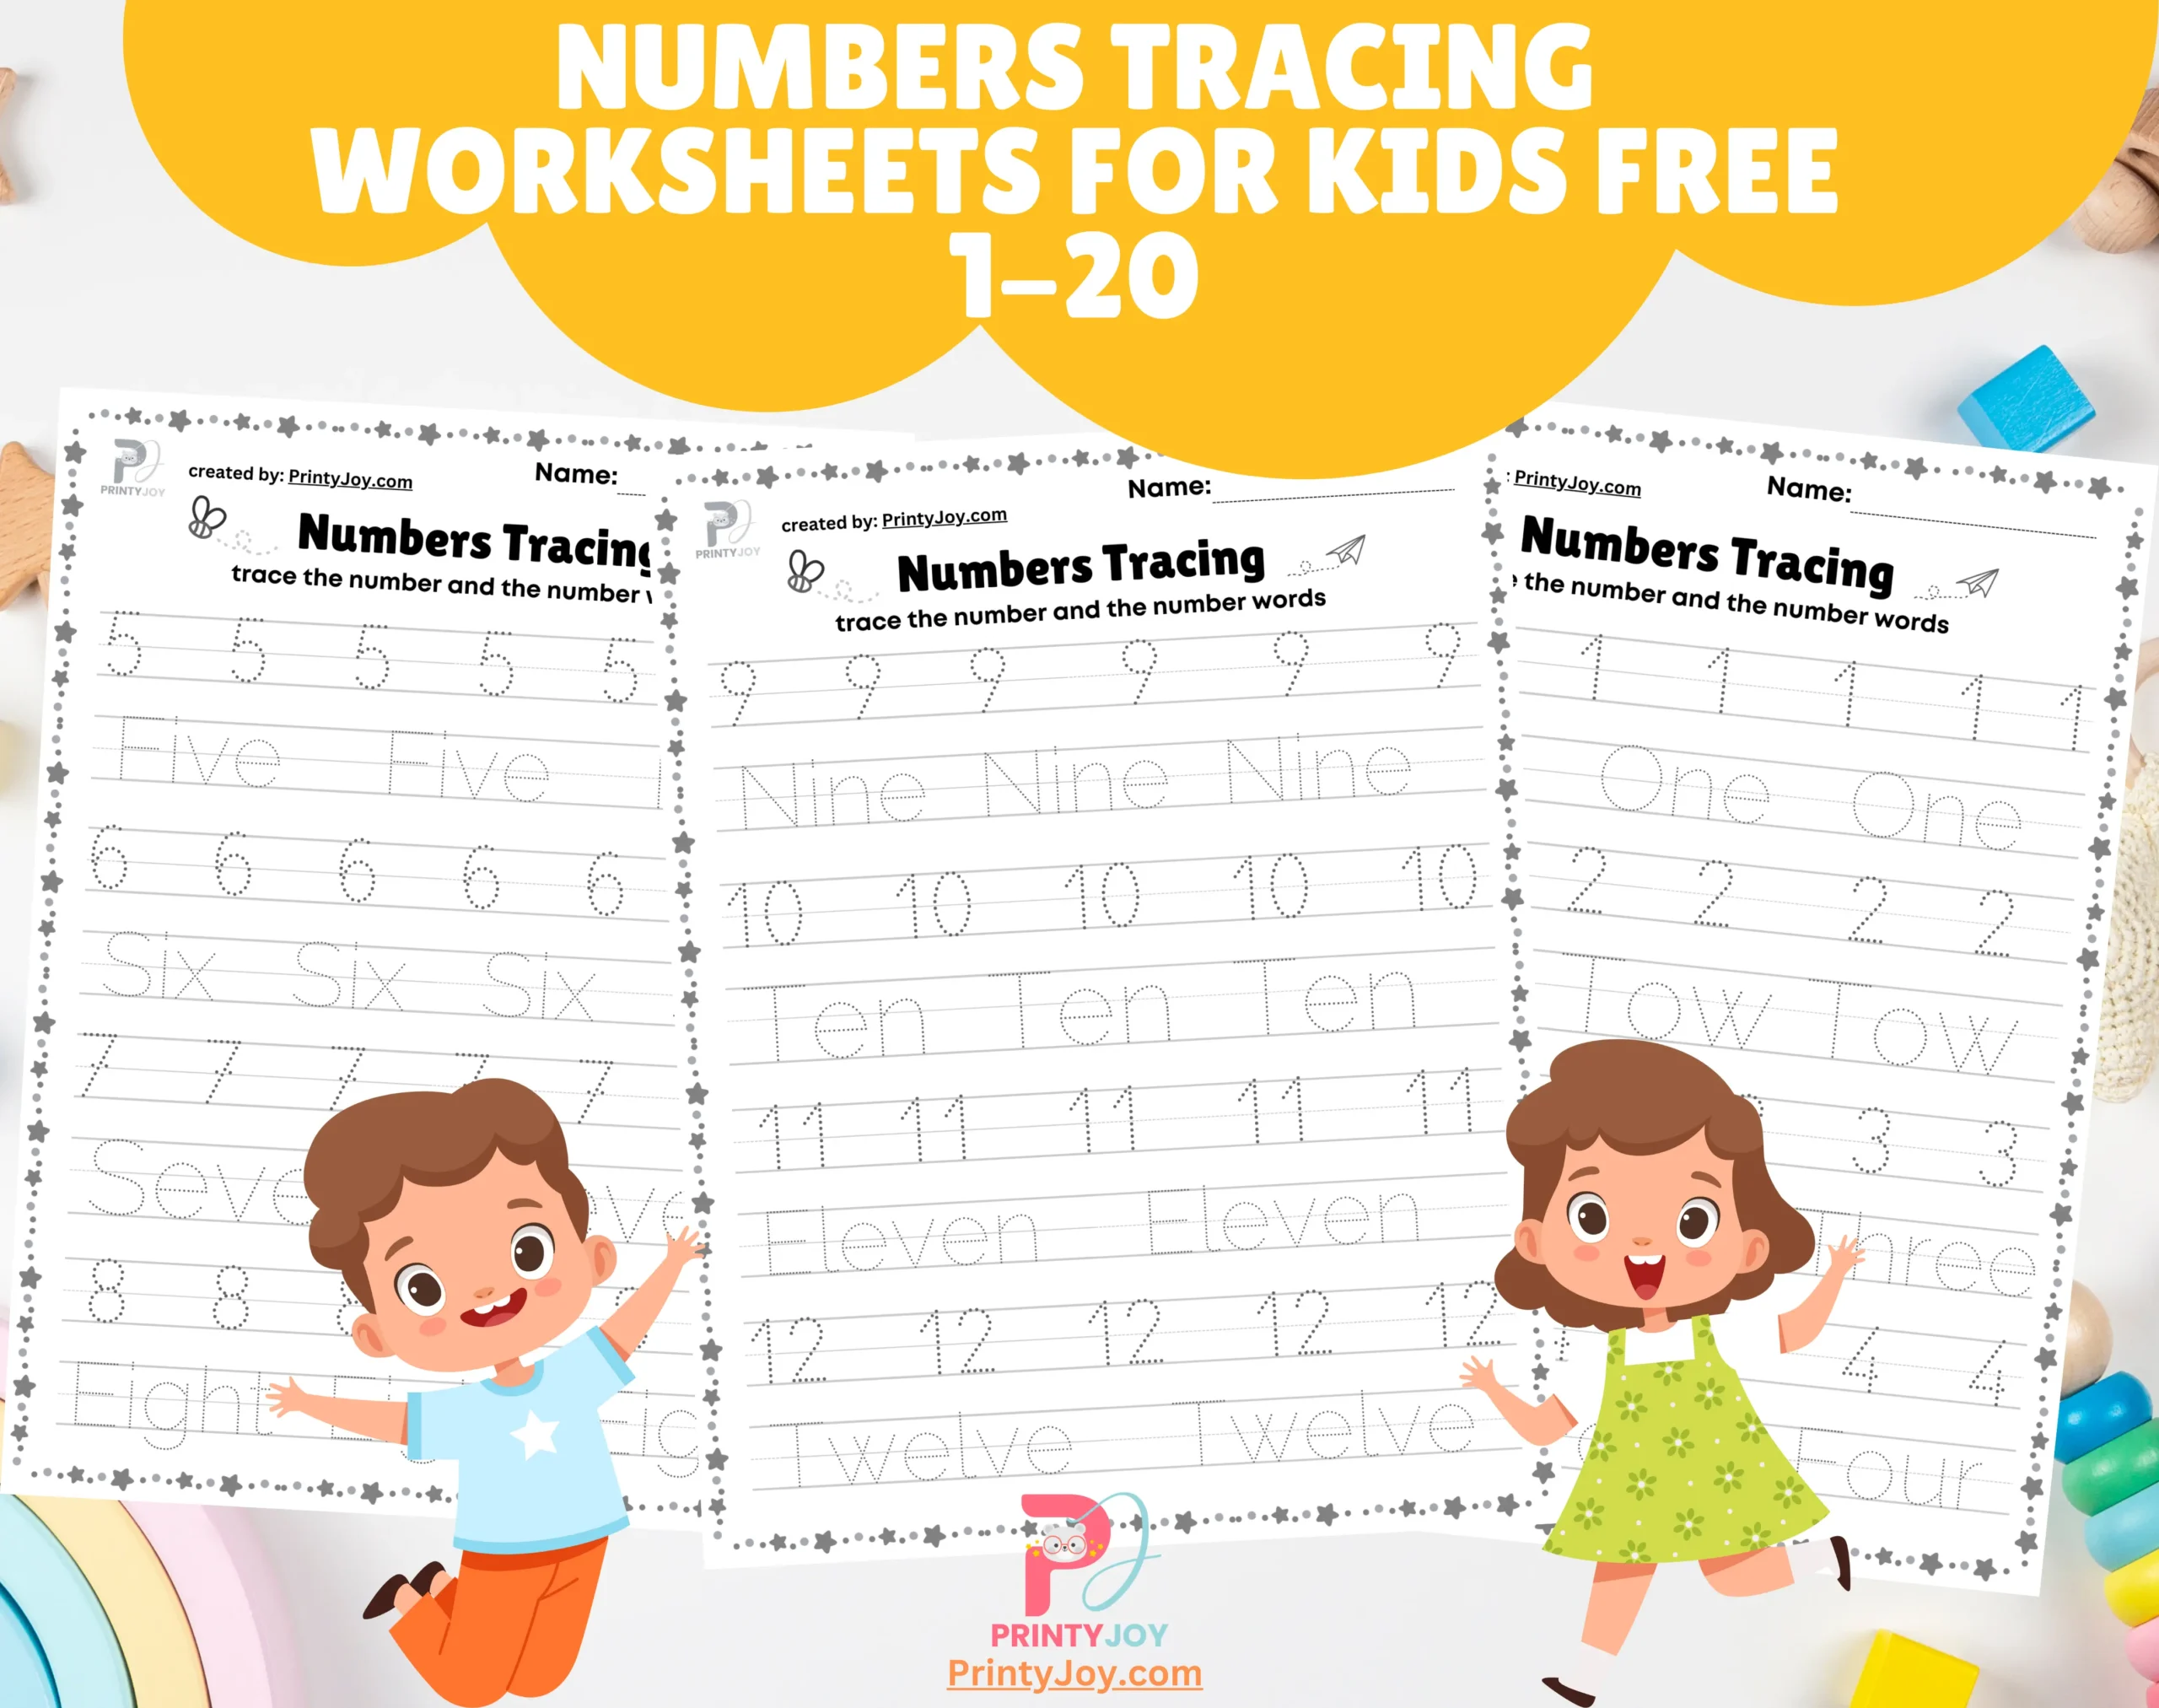 Numbers Tracing Worksheets For Kids Free